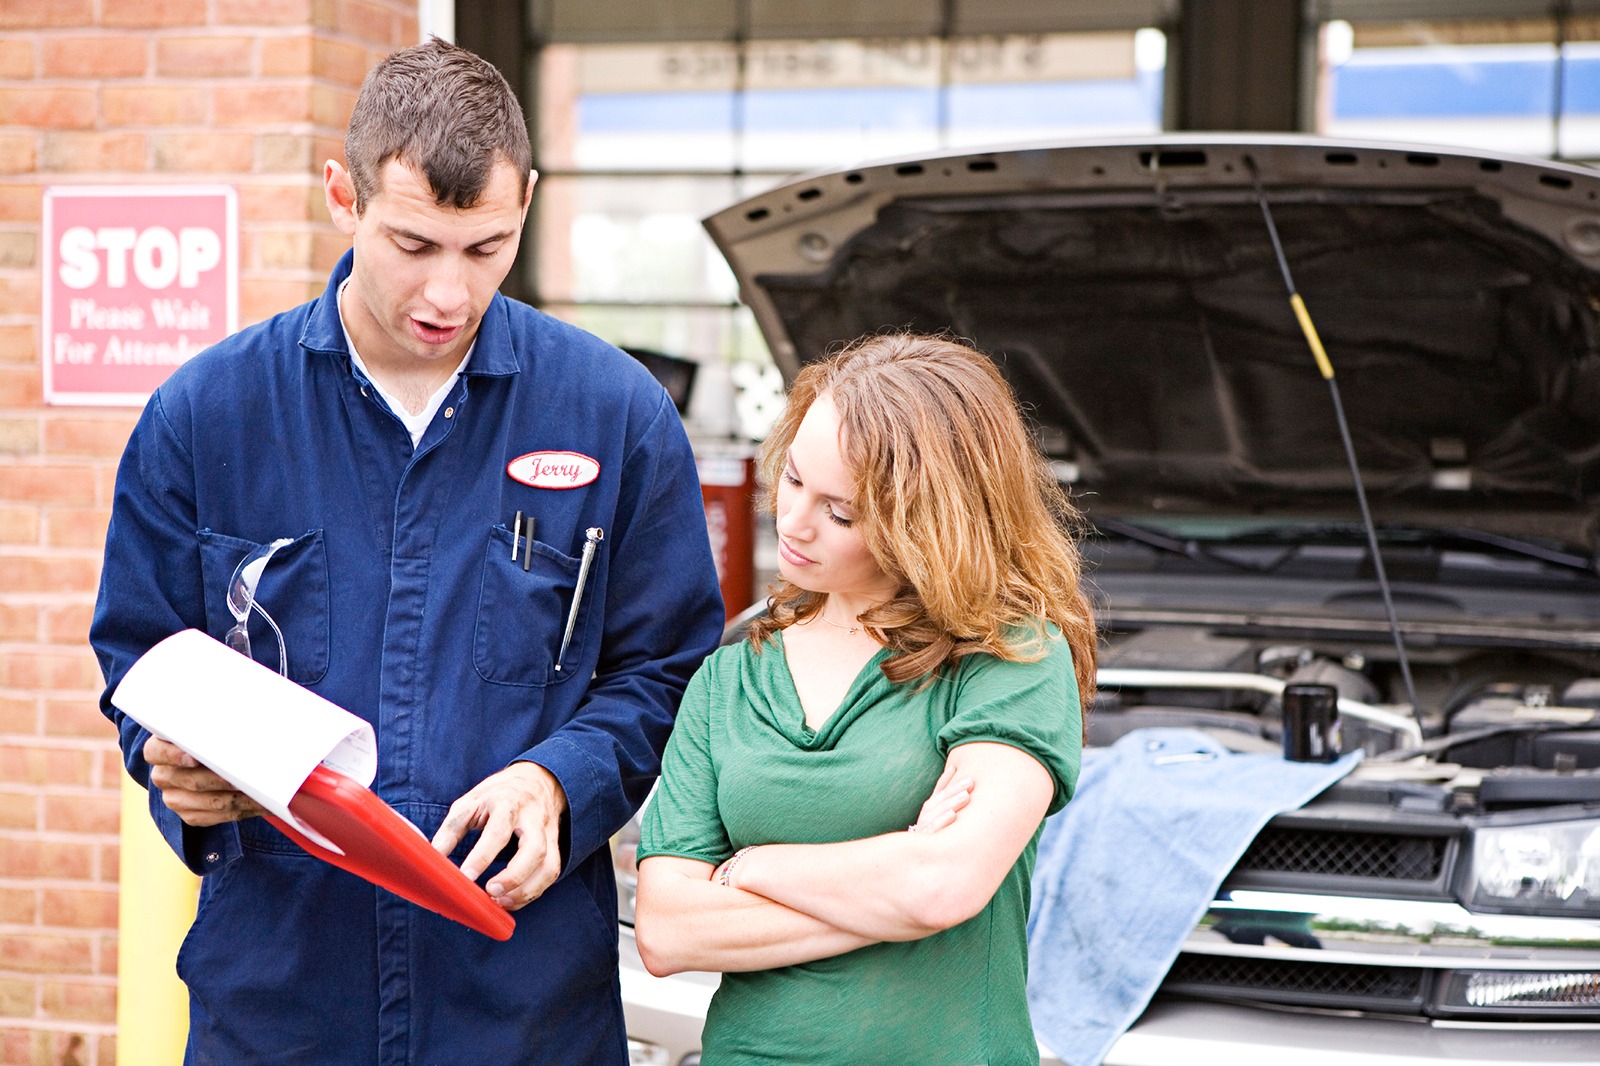 7 Tips for Finding an Awesome Mechanic